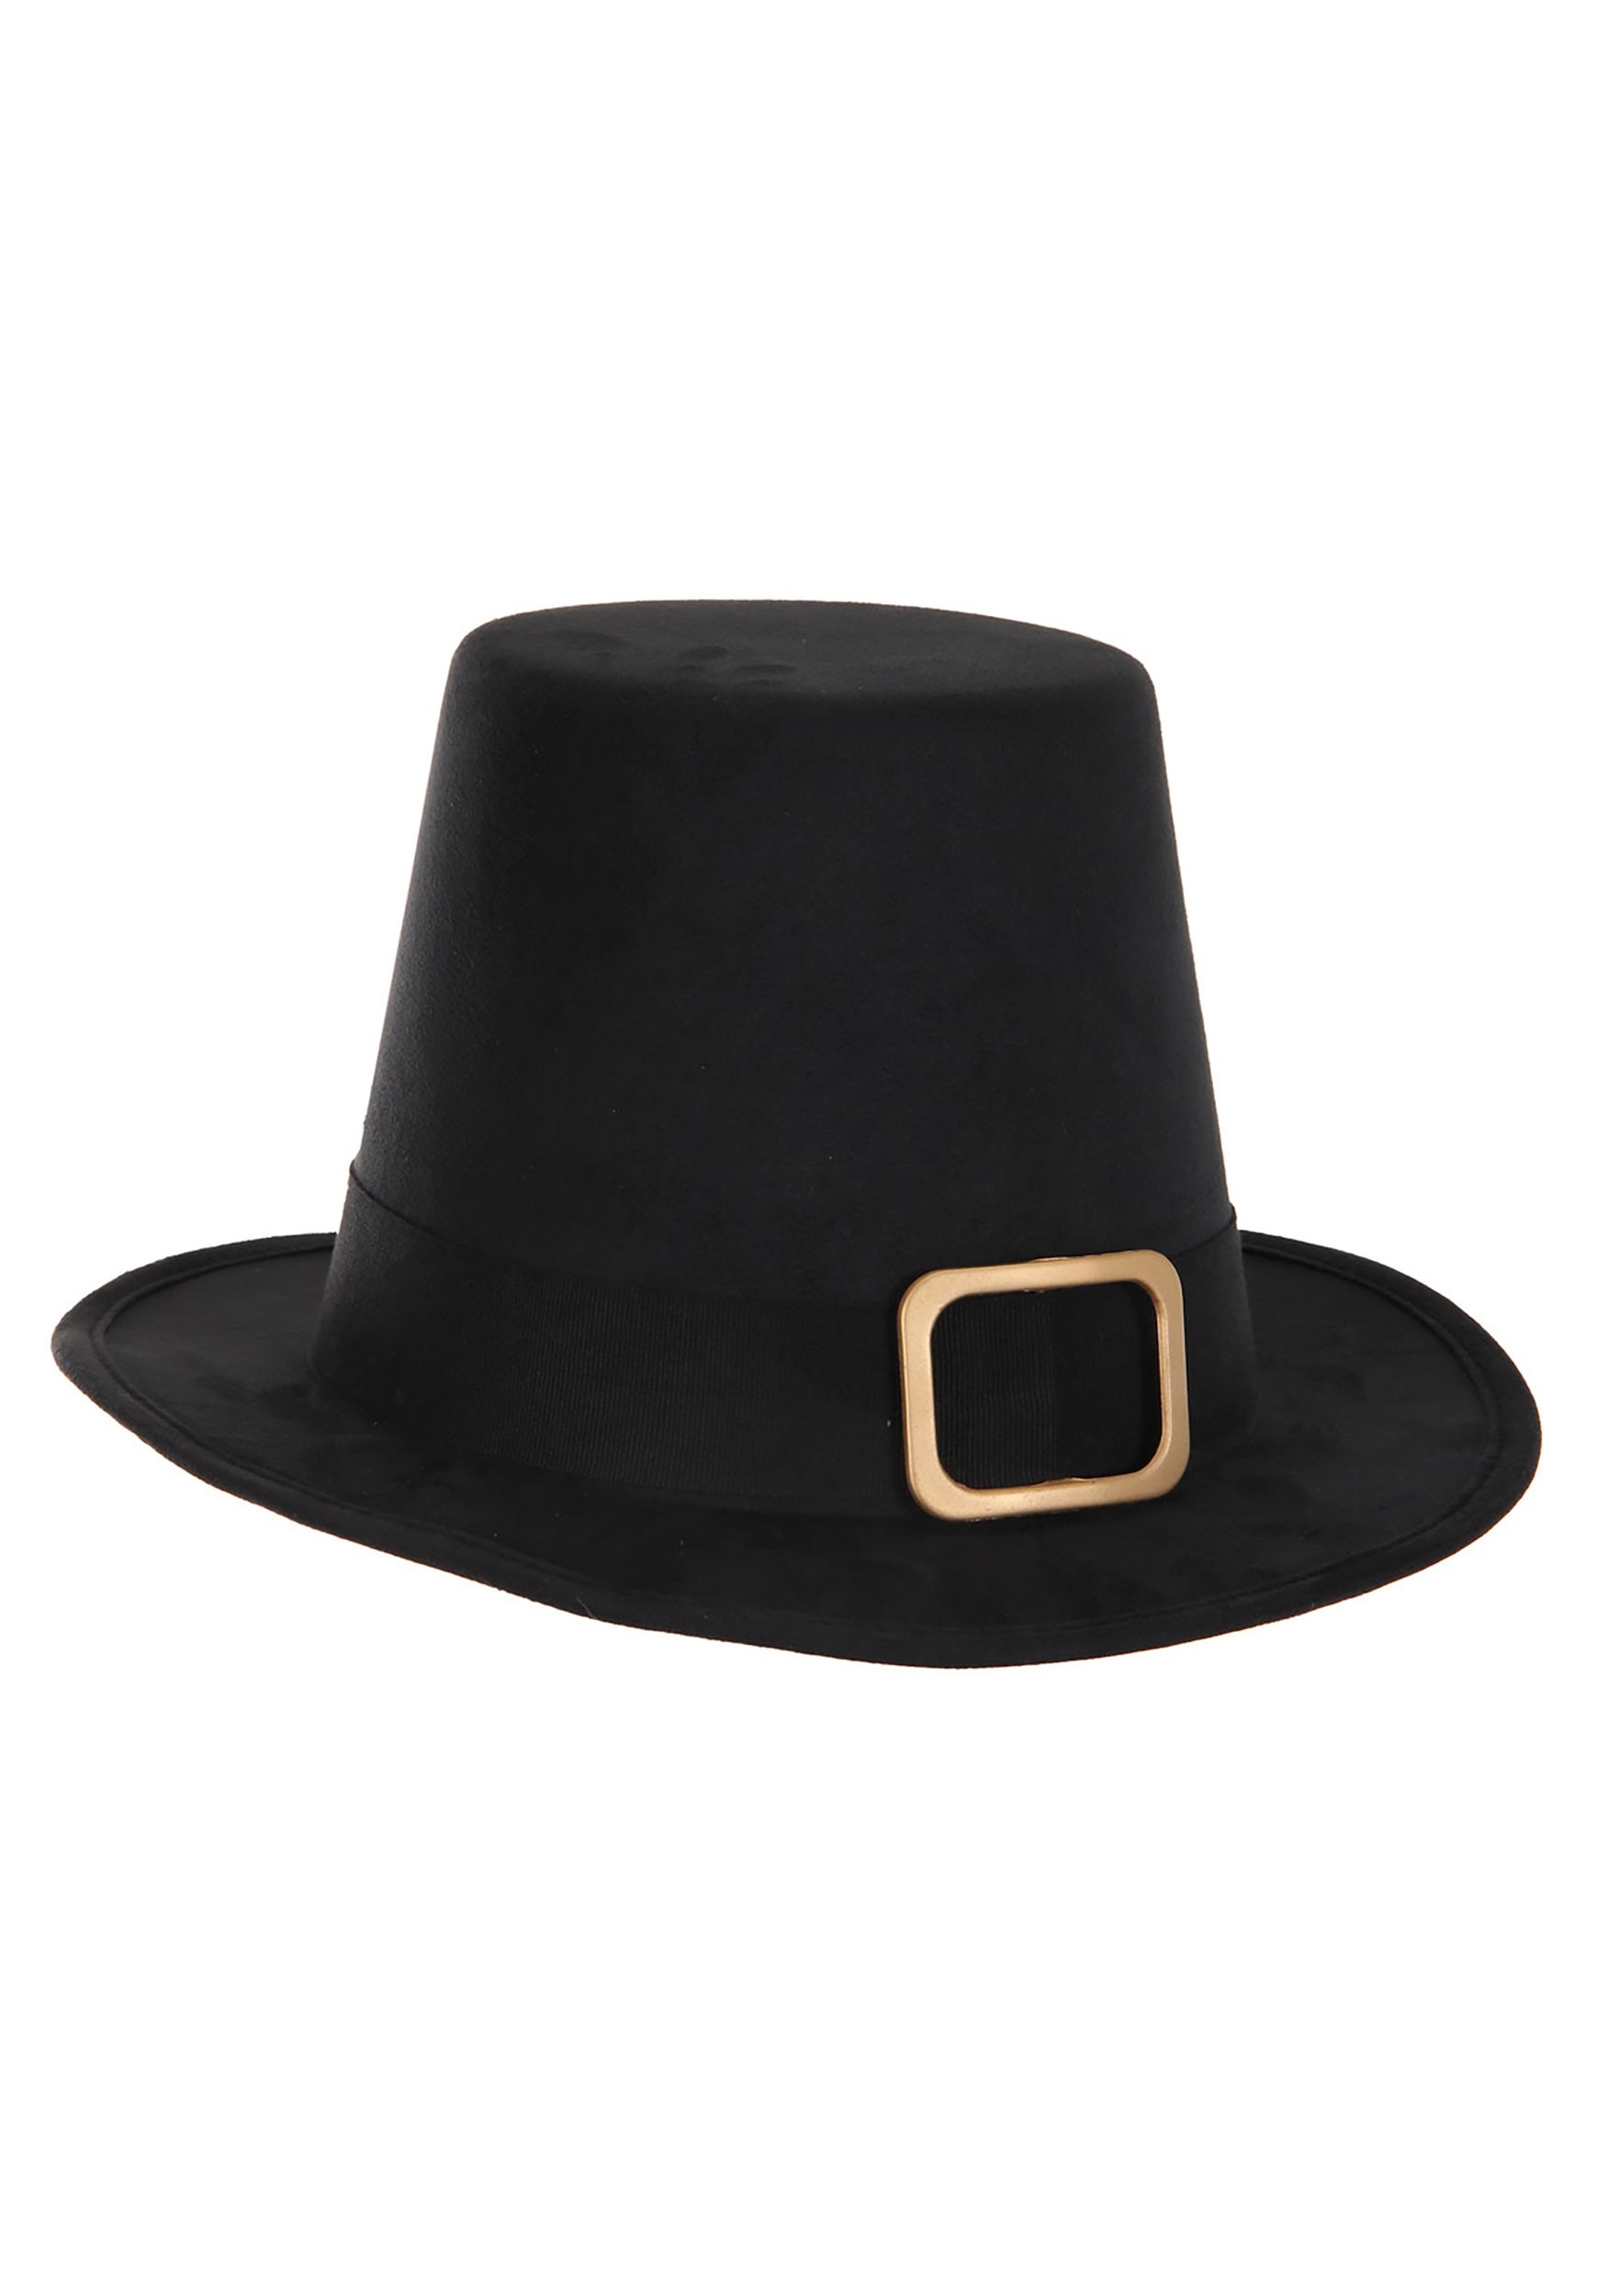 Deluxe Pilgrim Costume Hat For Adults